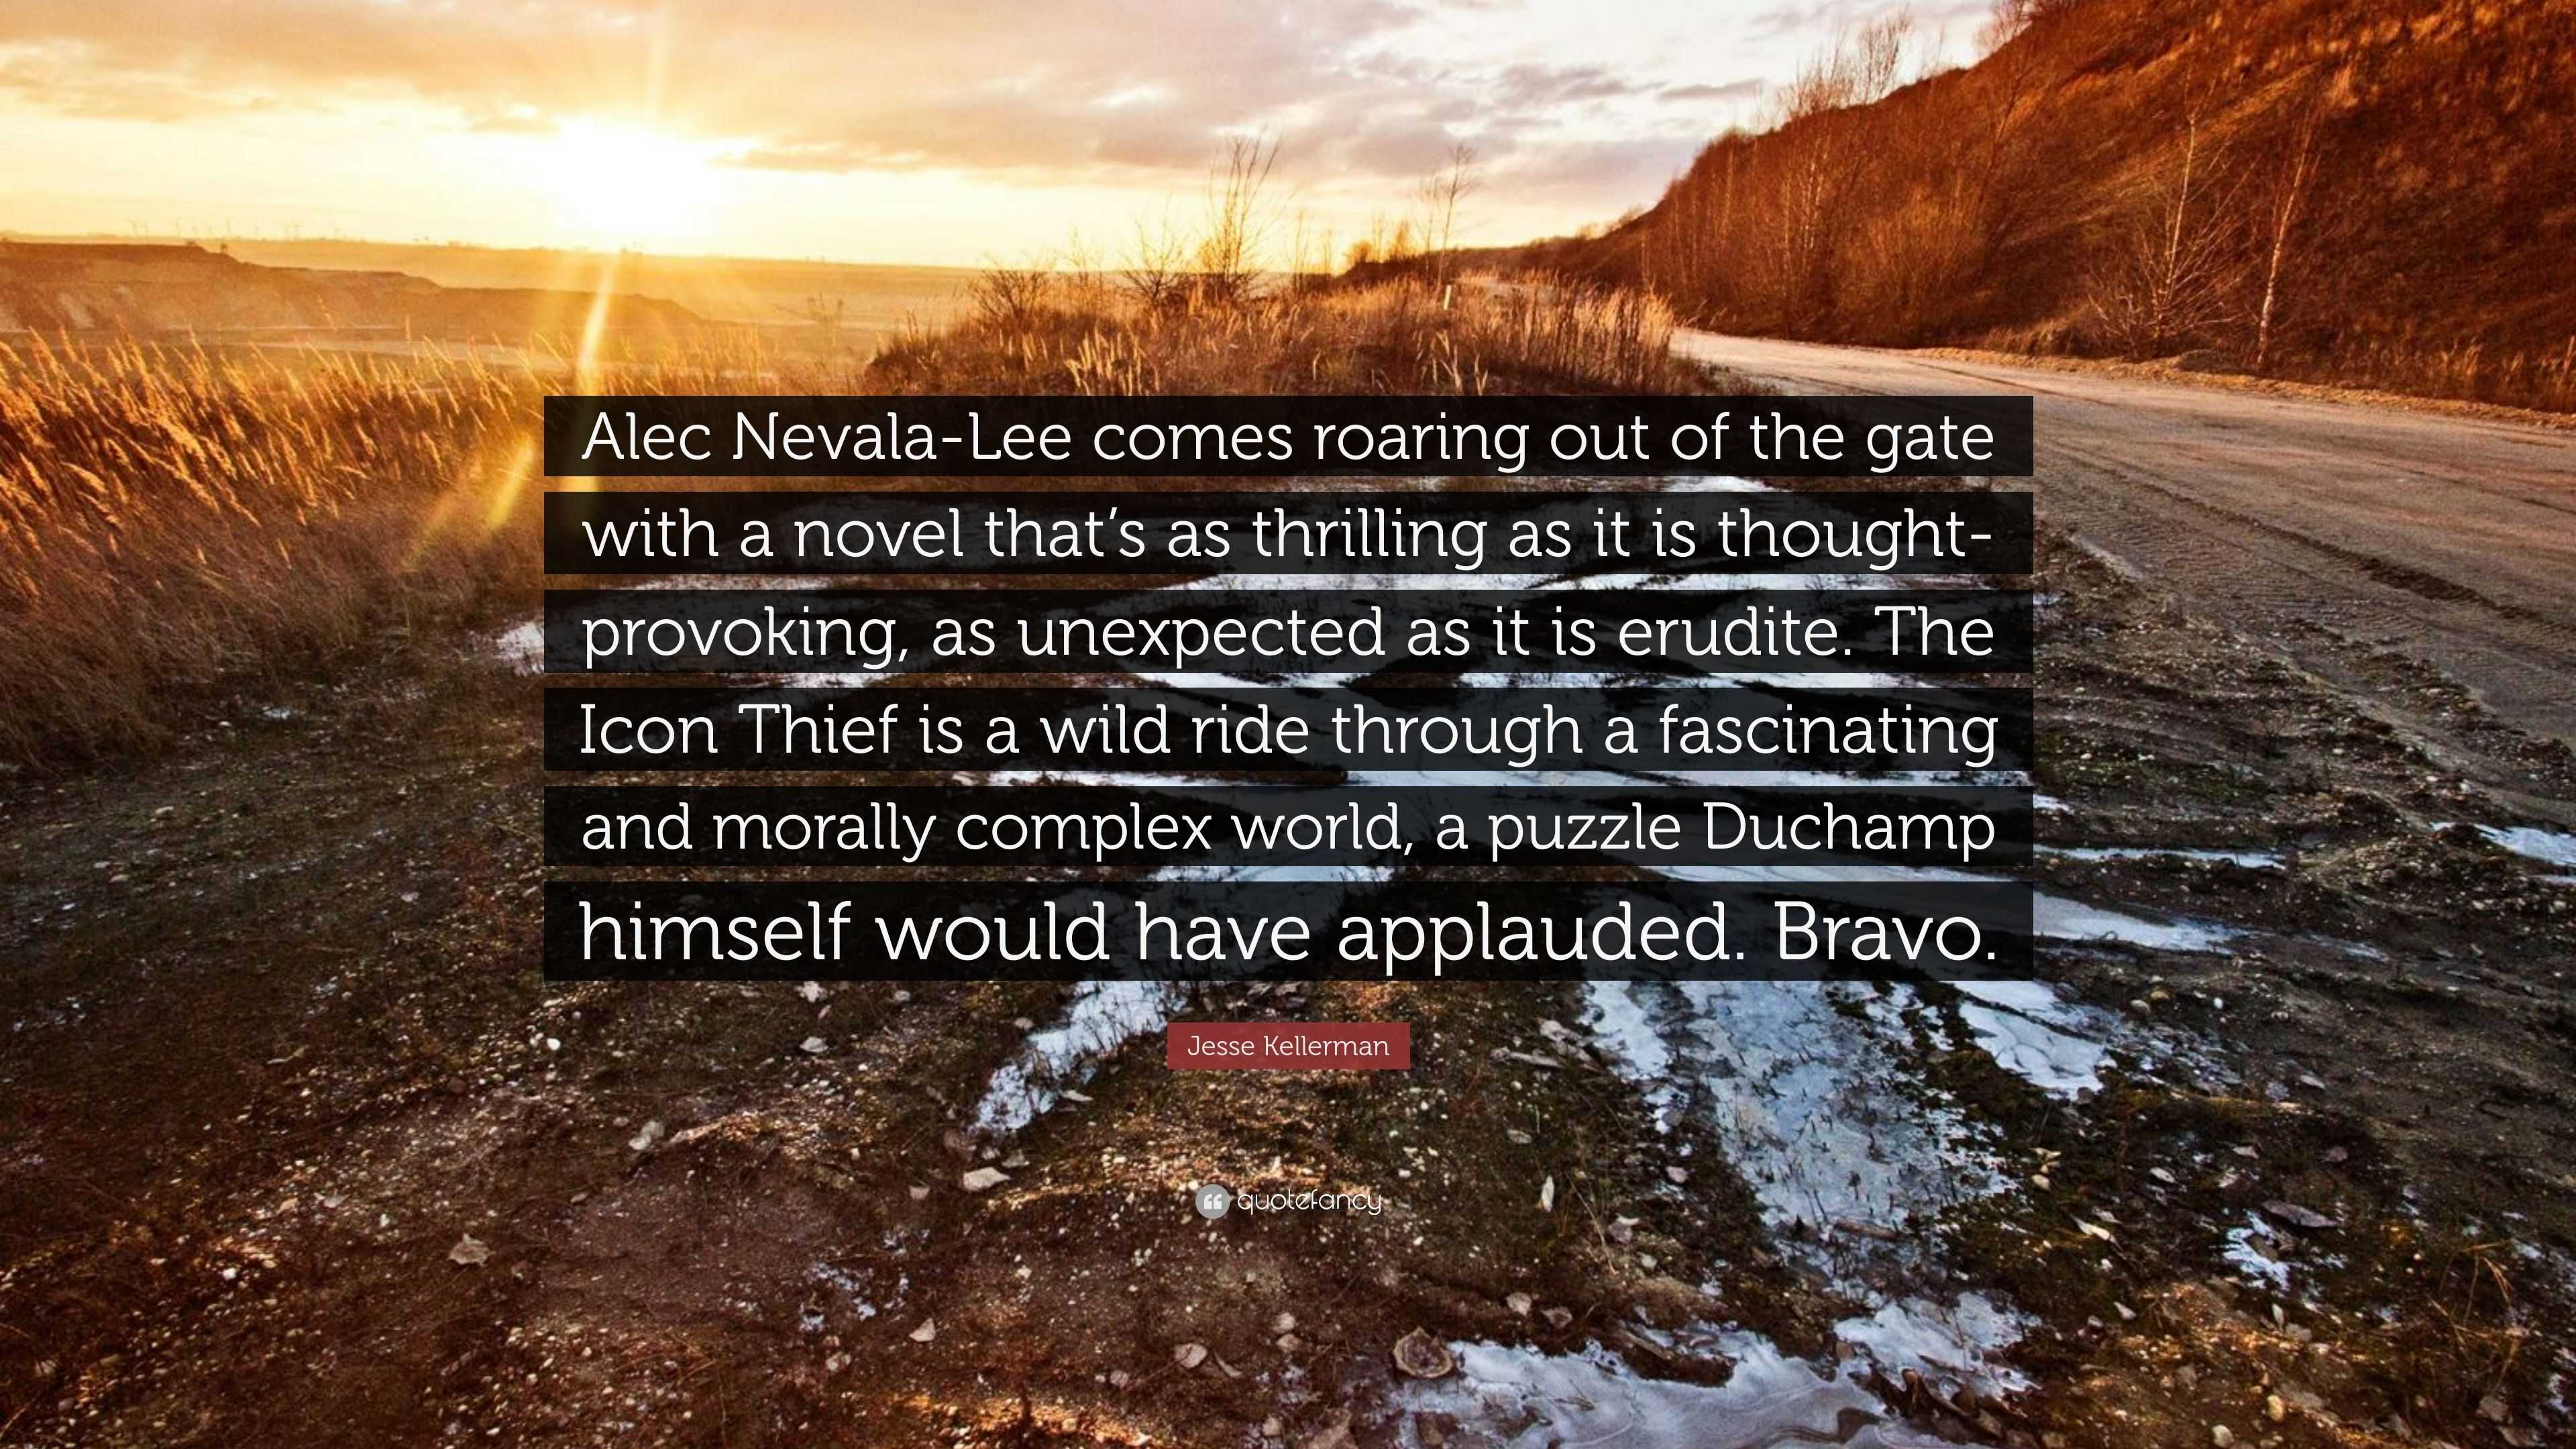 Jesse Kellerman Quote: “Alec Nevala-Lee comes roaring out of the gate with  a novel that's as thrilling as it is thought-provoking, as unexpected...”